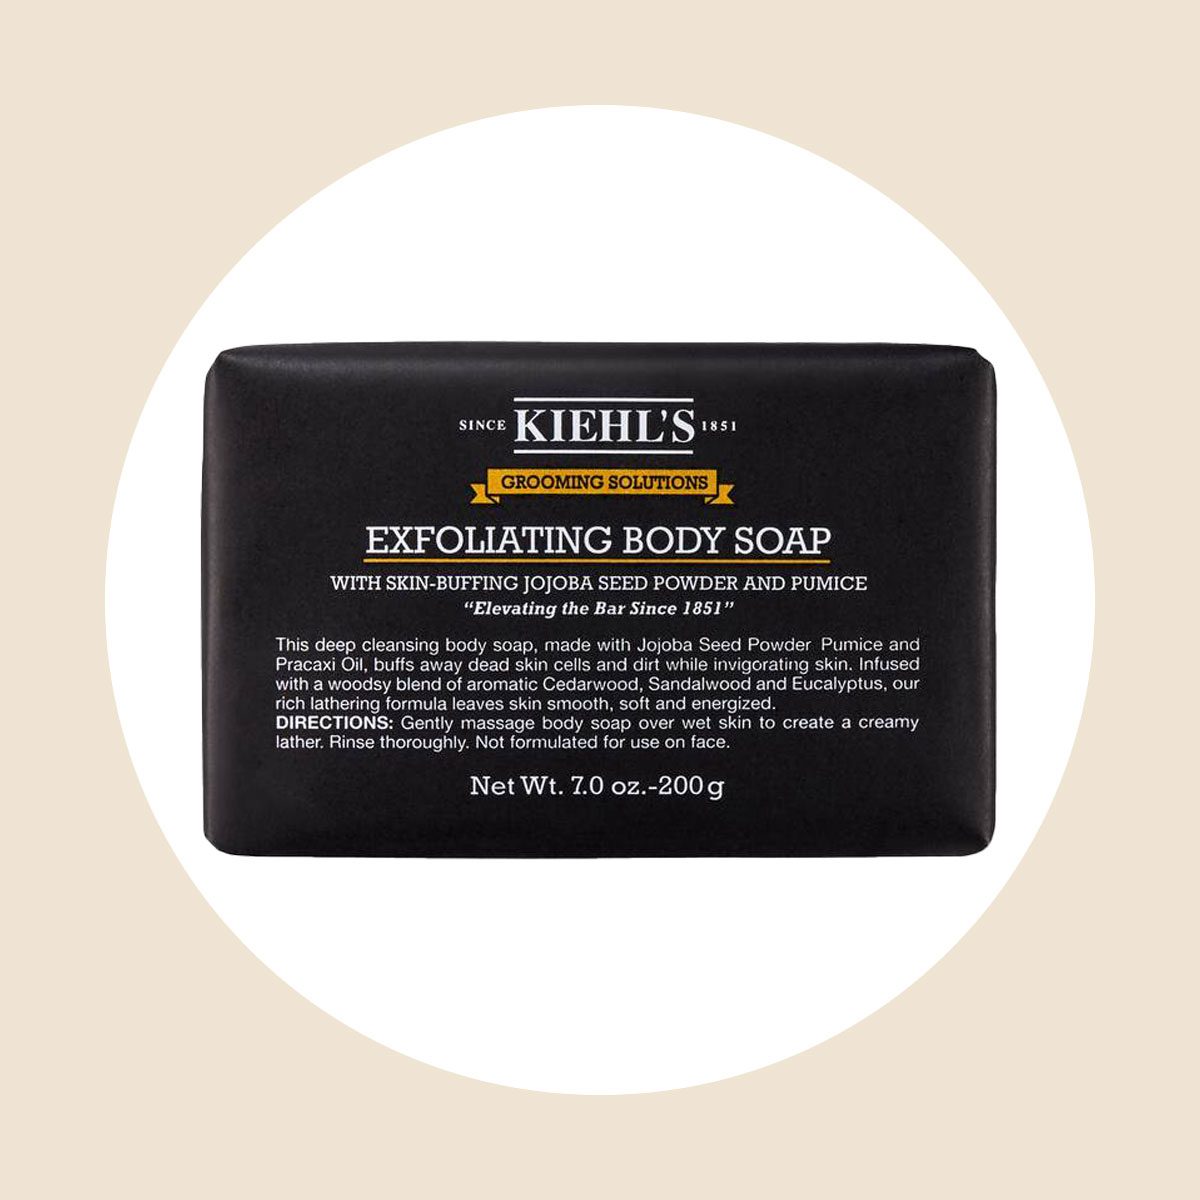 Kiehls Men Body Cleanser Grooming Solutions Exfoliating Body Soap 200g 000 3605971562044 Front